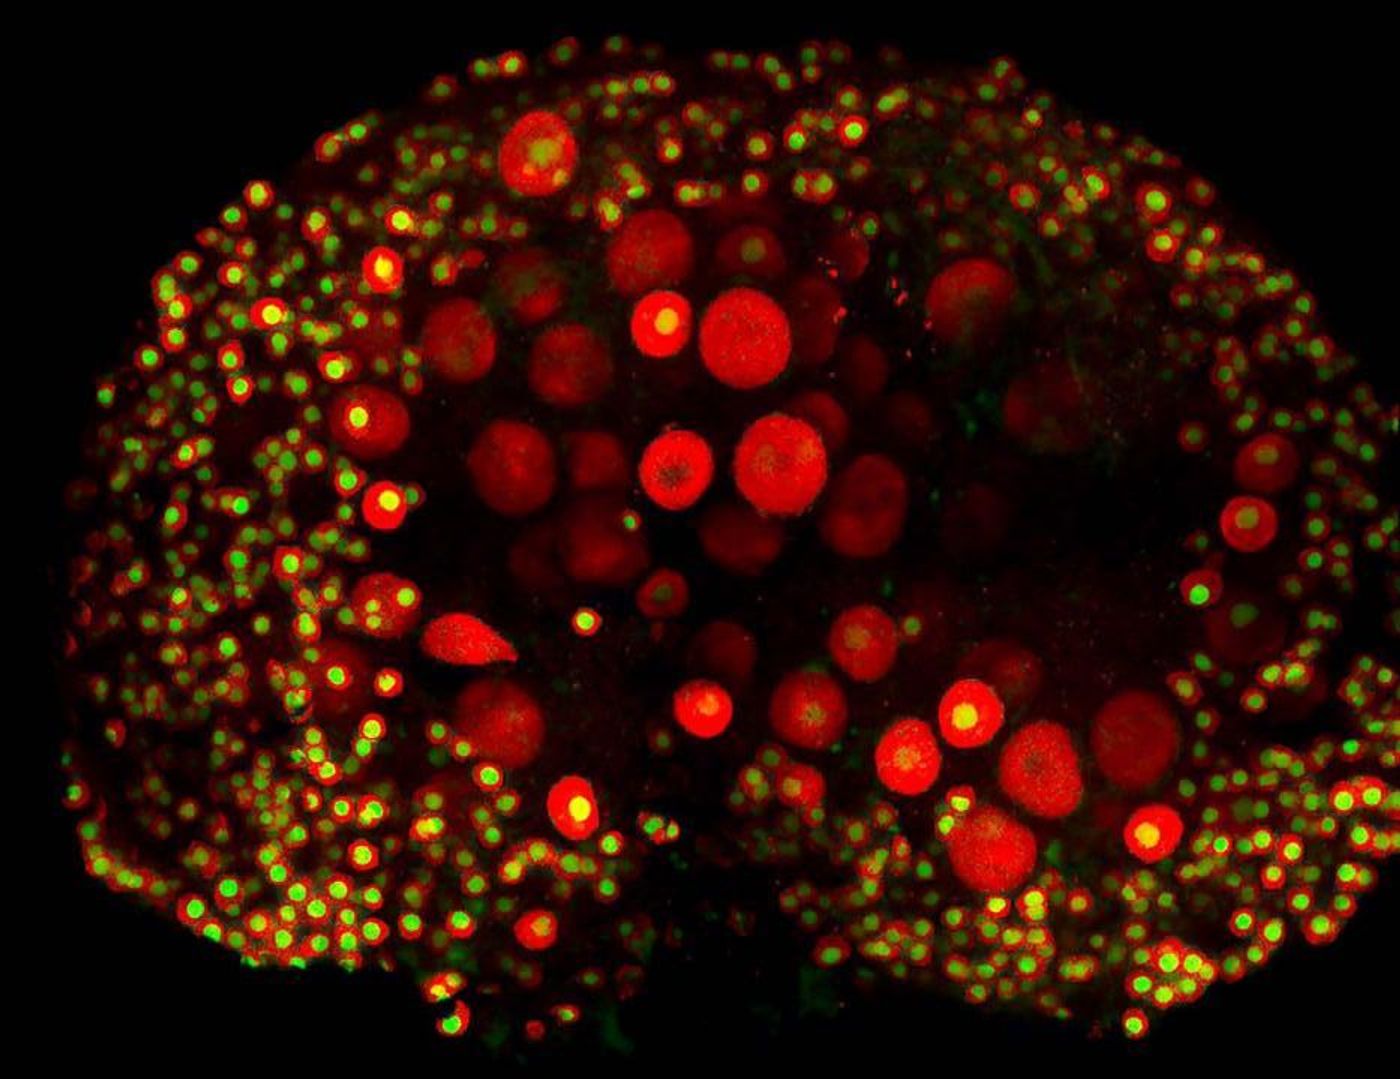 The image shows a mouse ovary with proteins specific to oocytes labelled in red and yellow. / Credit: Schimenti Lab, Cornell University